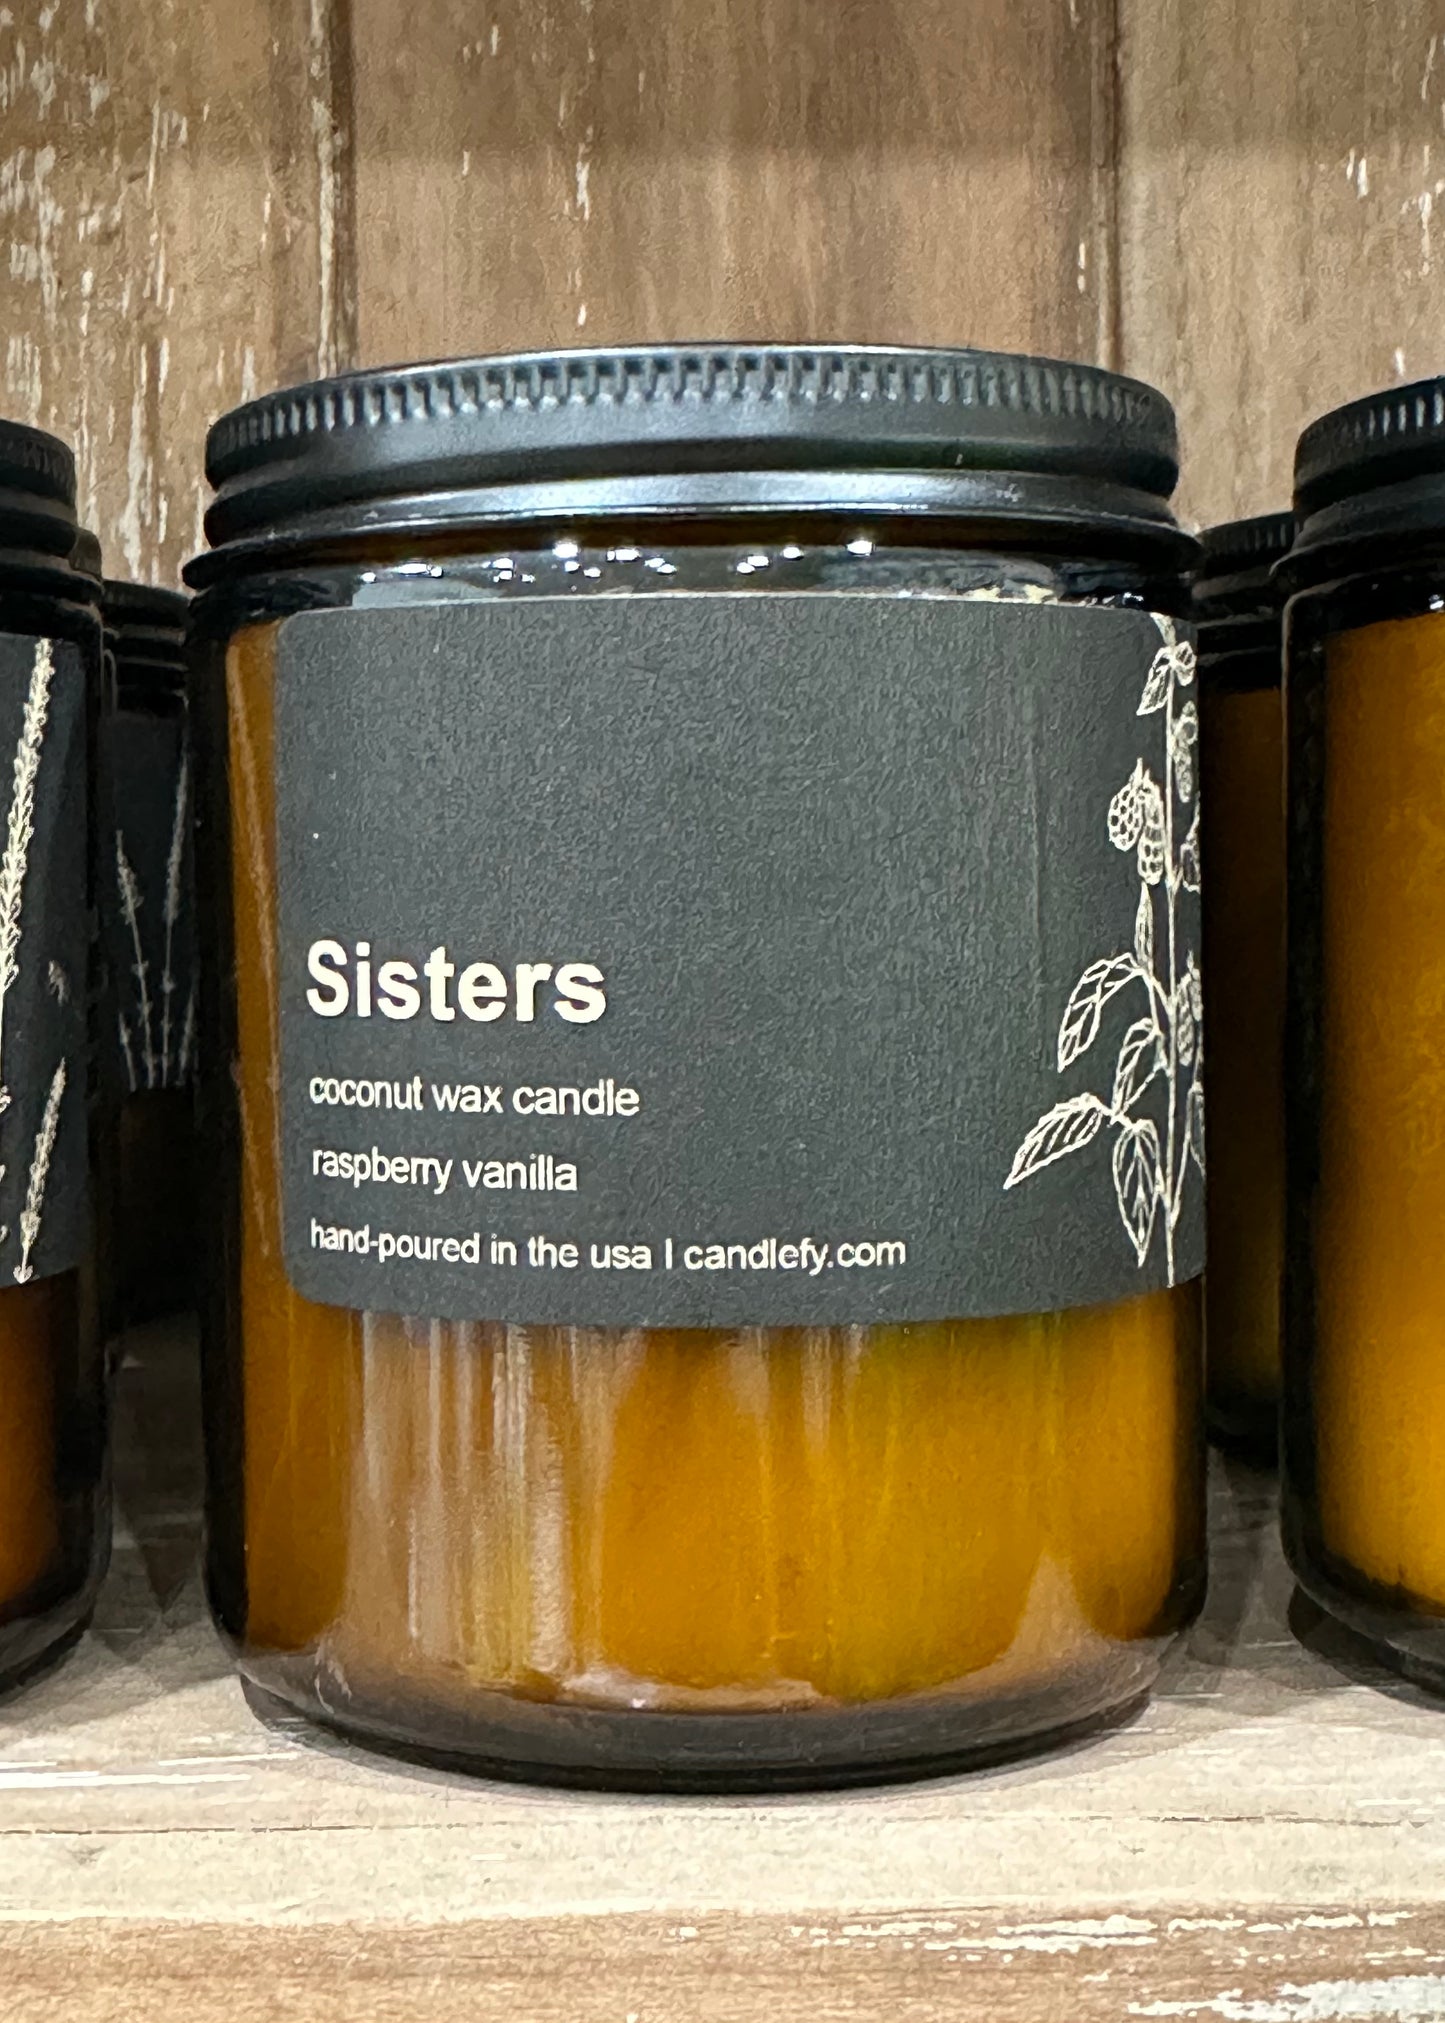 "Sisters" Wax Candle